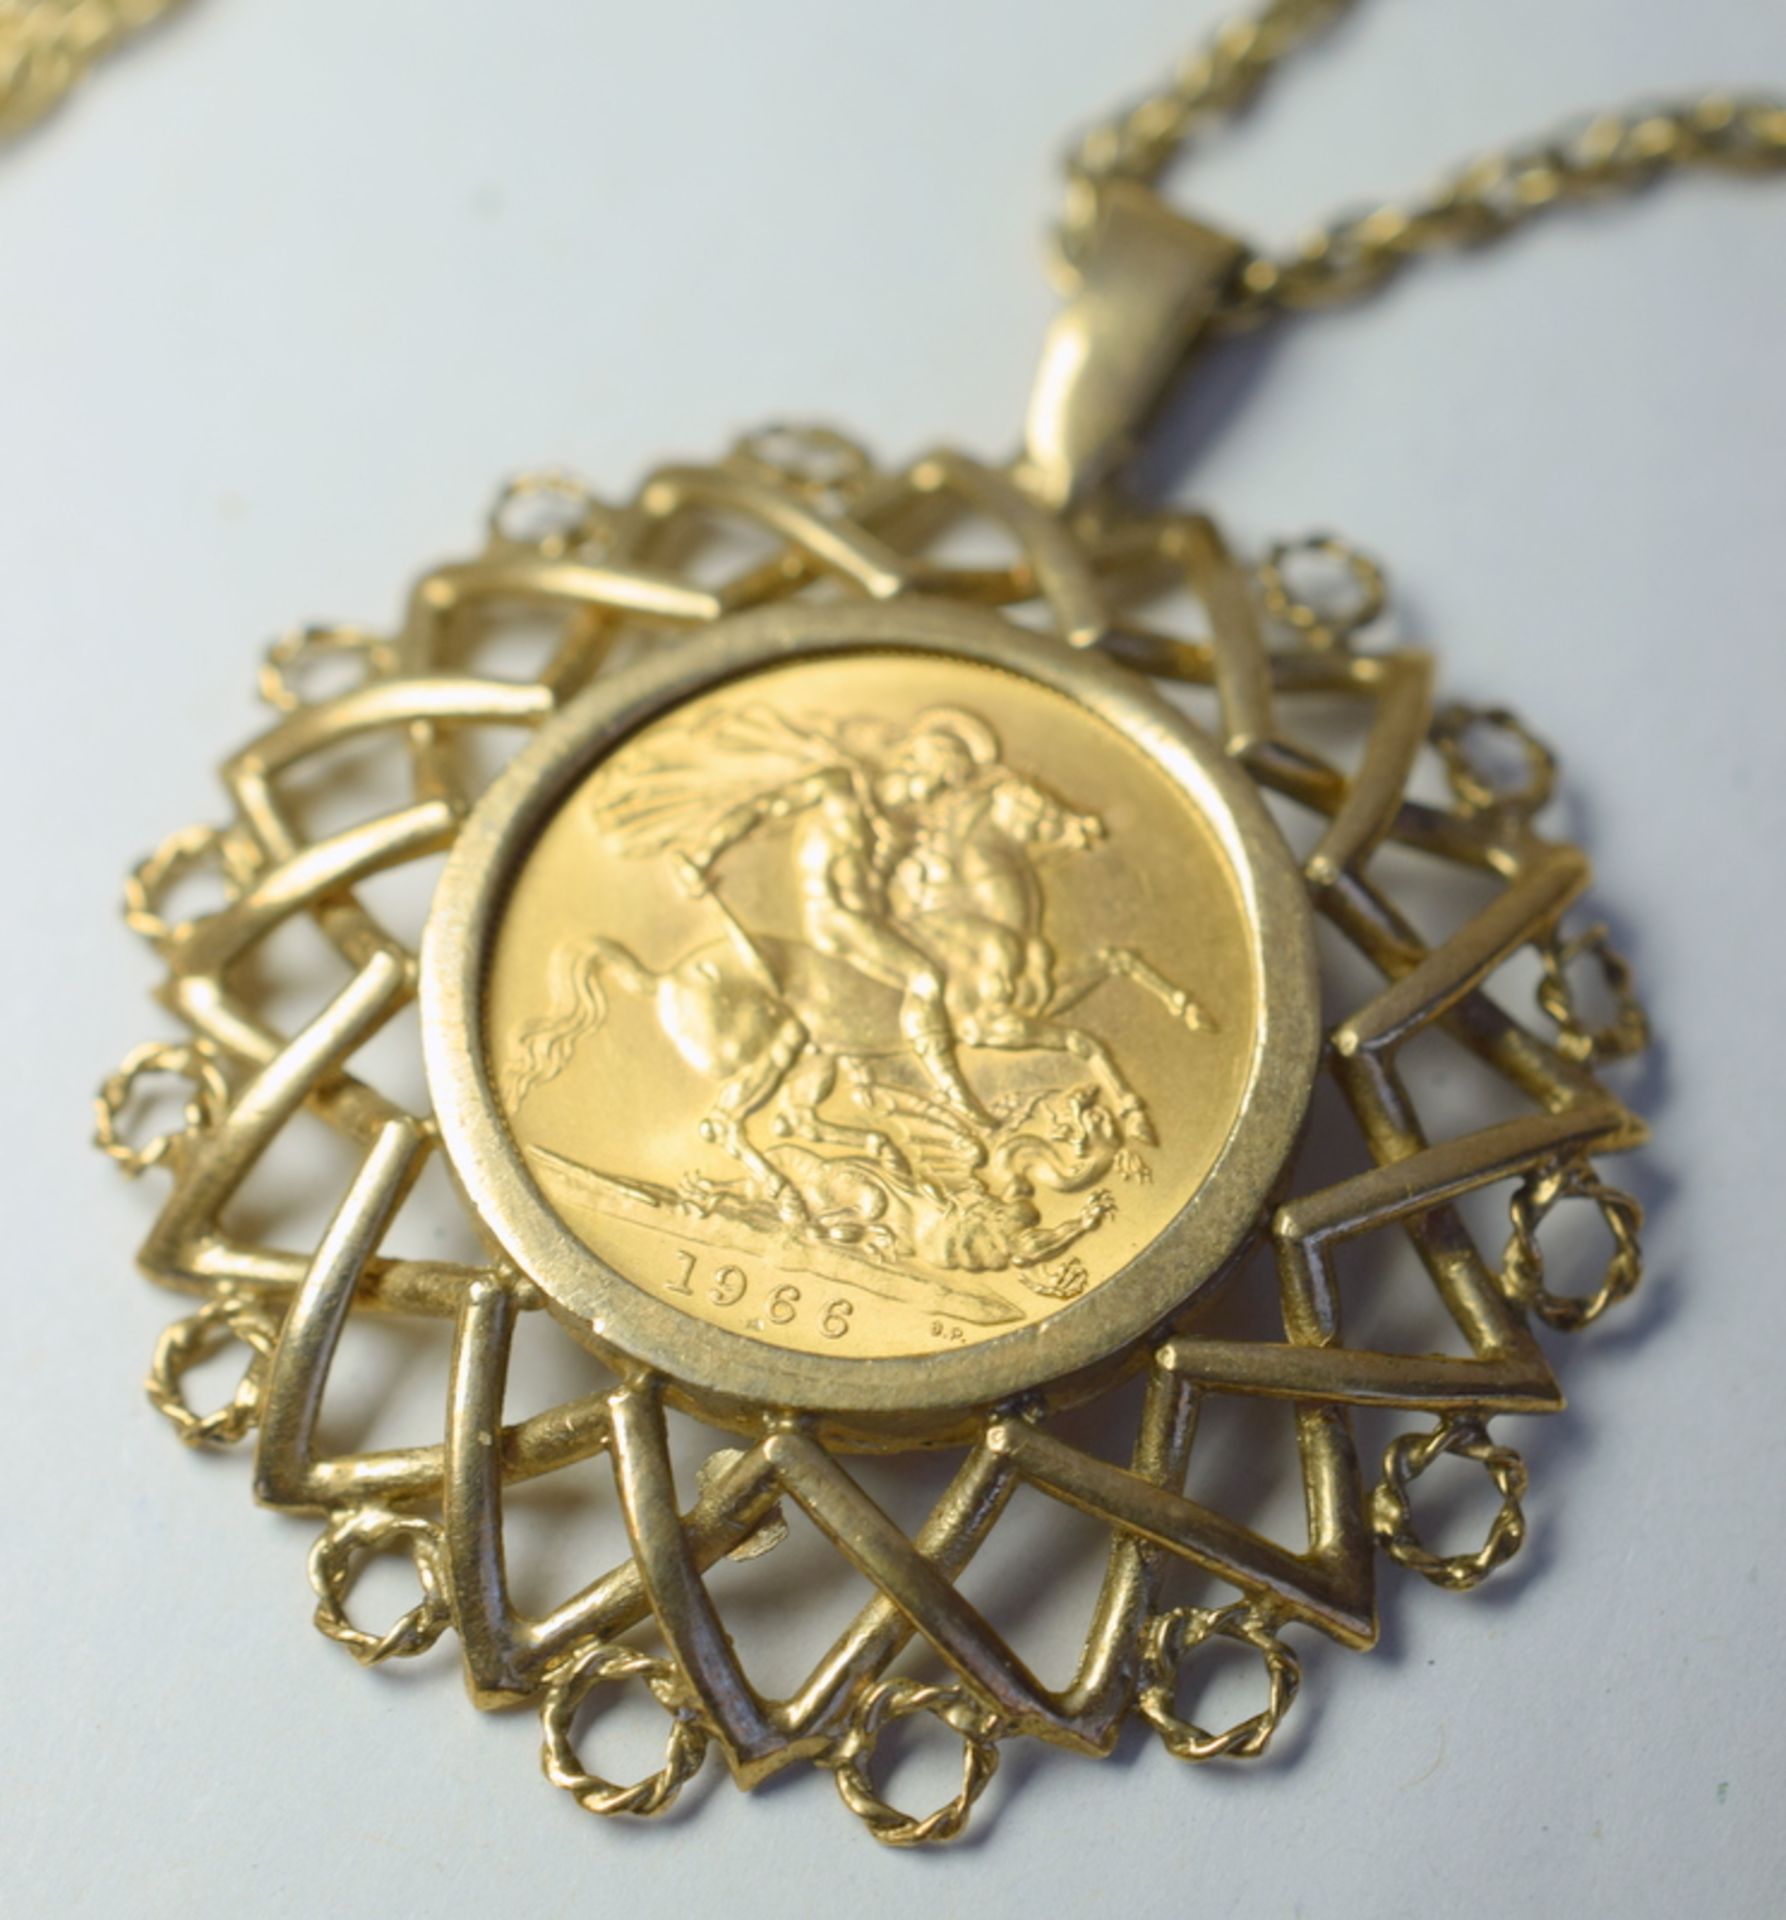 Full Sovereign 1966 on 9ct Gold Chain - Image 2 of 3